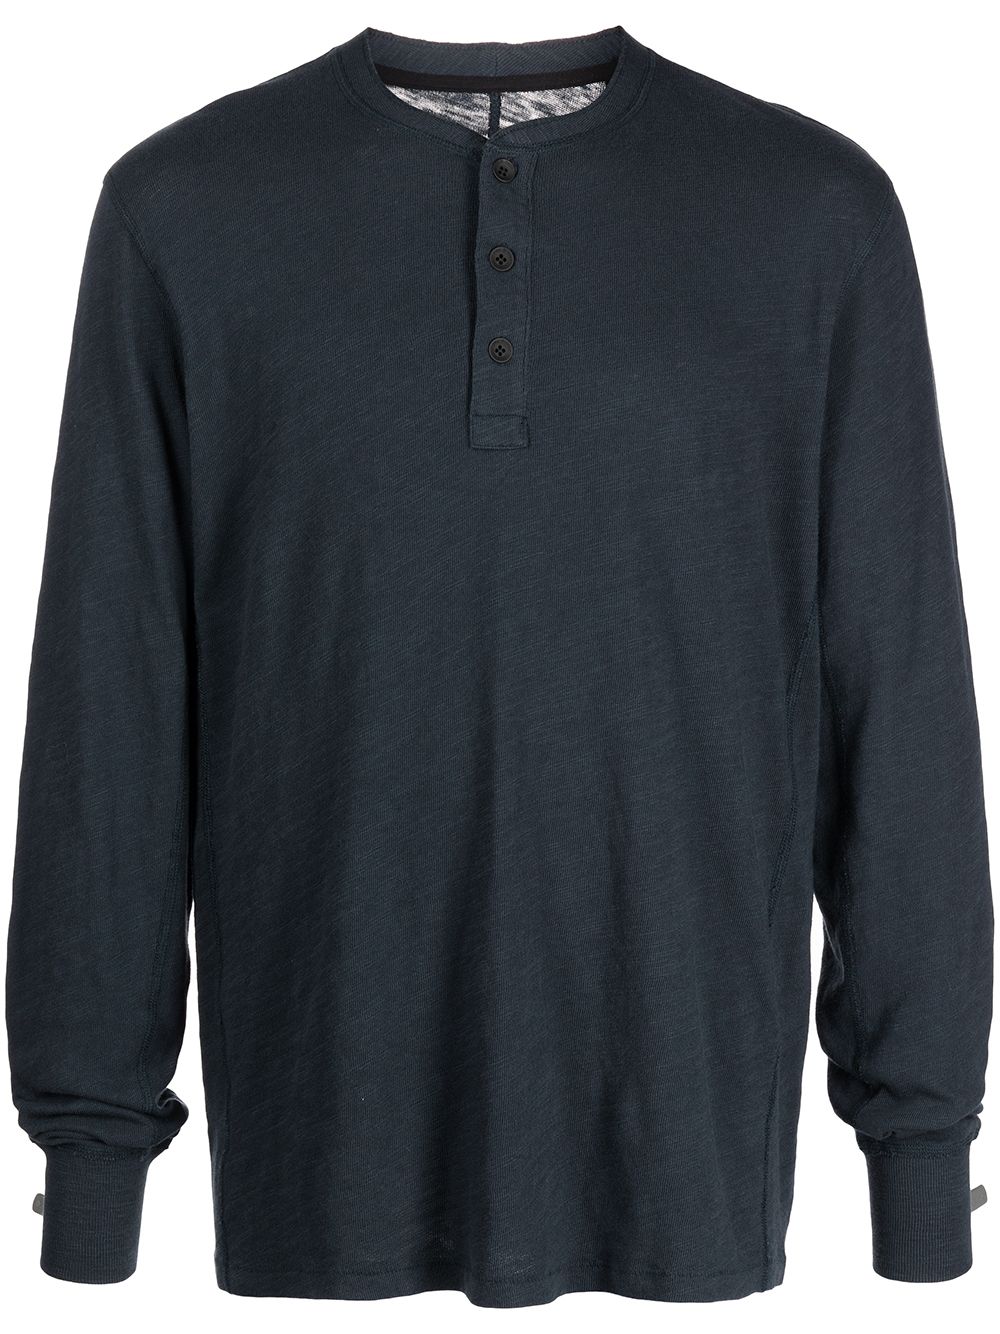 round-neck long-sleeve top